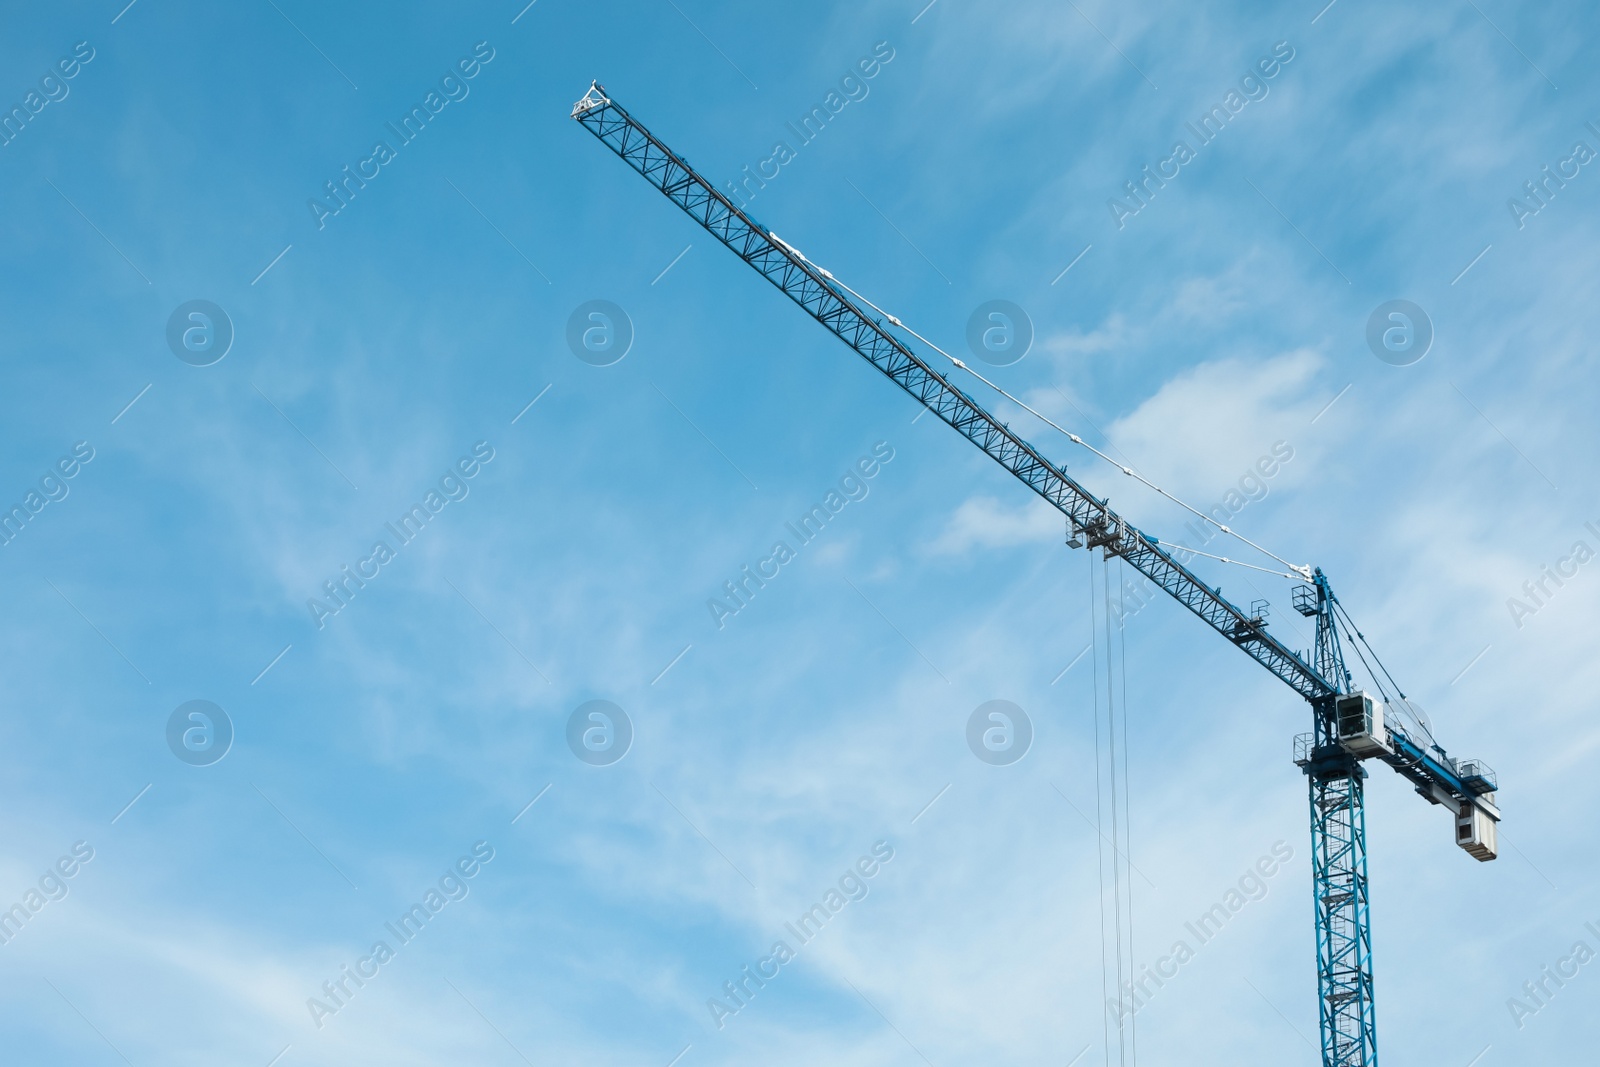 Photo of Tower crane against cloudy sky, low angle view